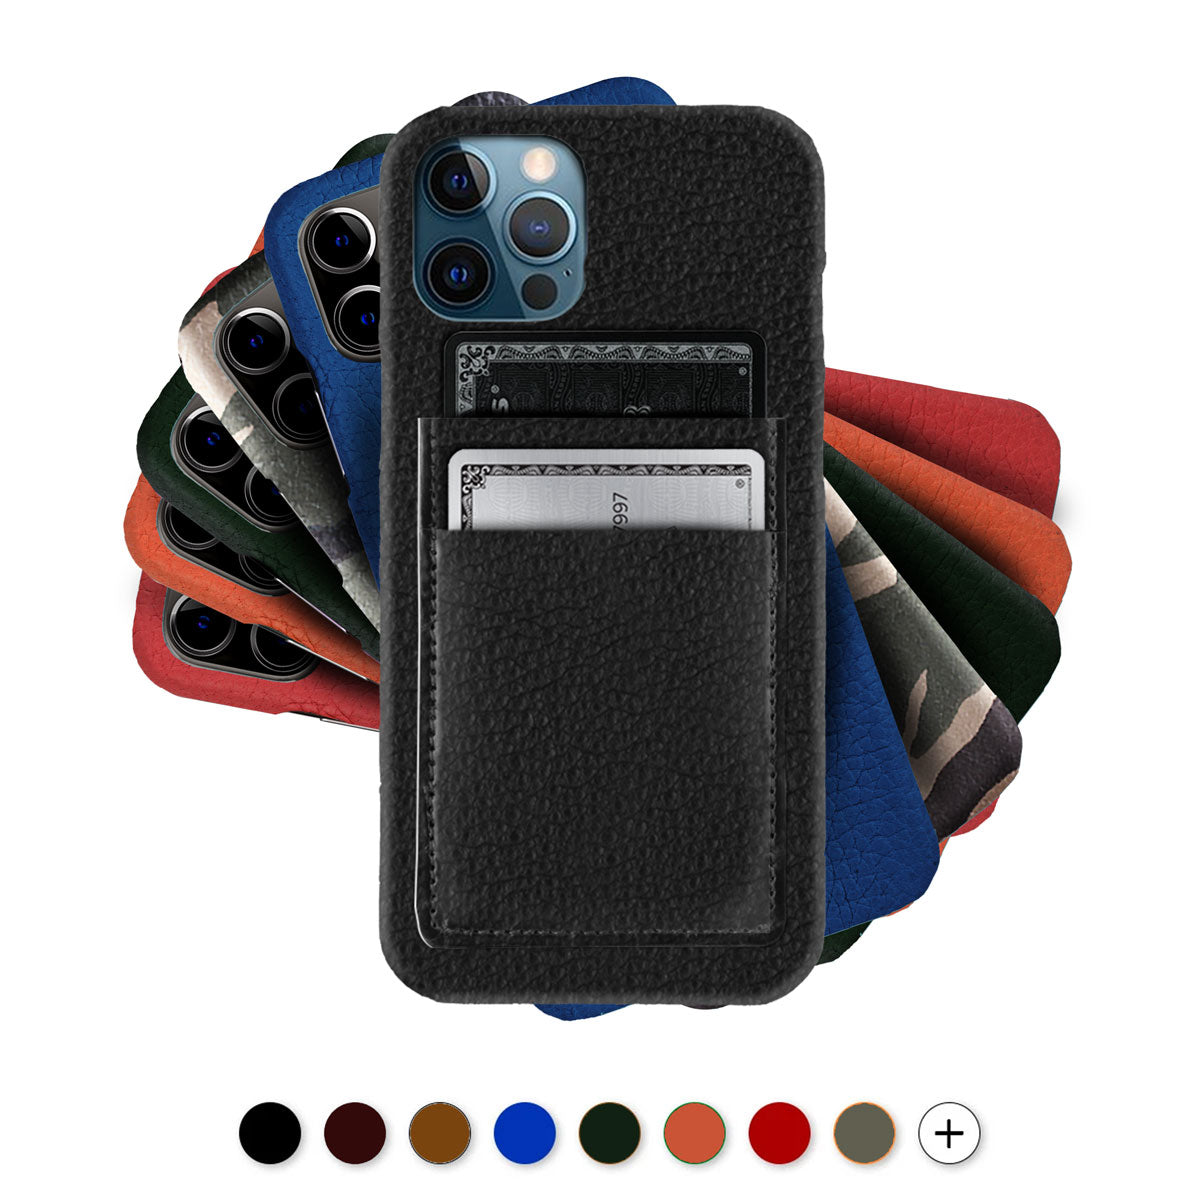 Leather iPhone " Double card case " / cover with credit card Pocket - iPhone 12 & 11 ( Pro / Max / Mini )  - Buffalo leather